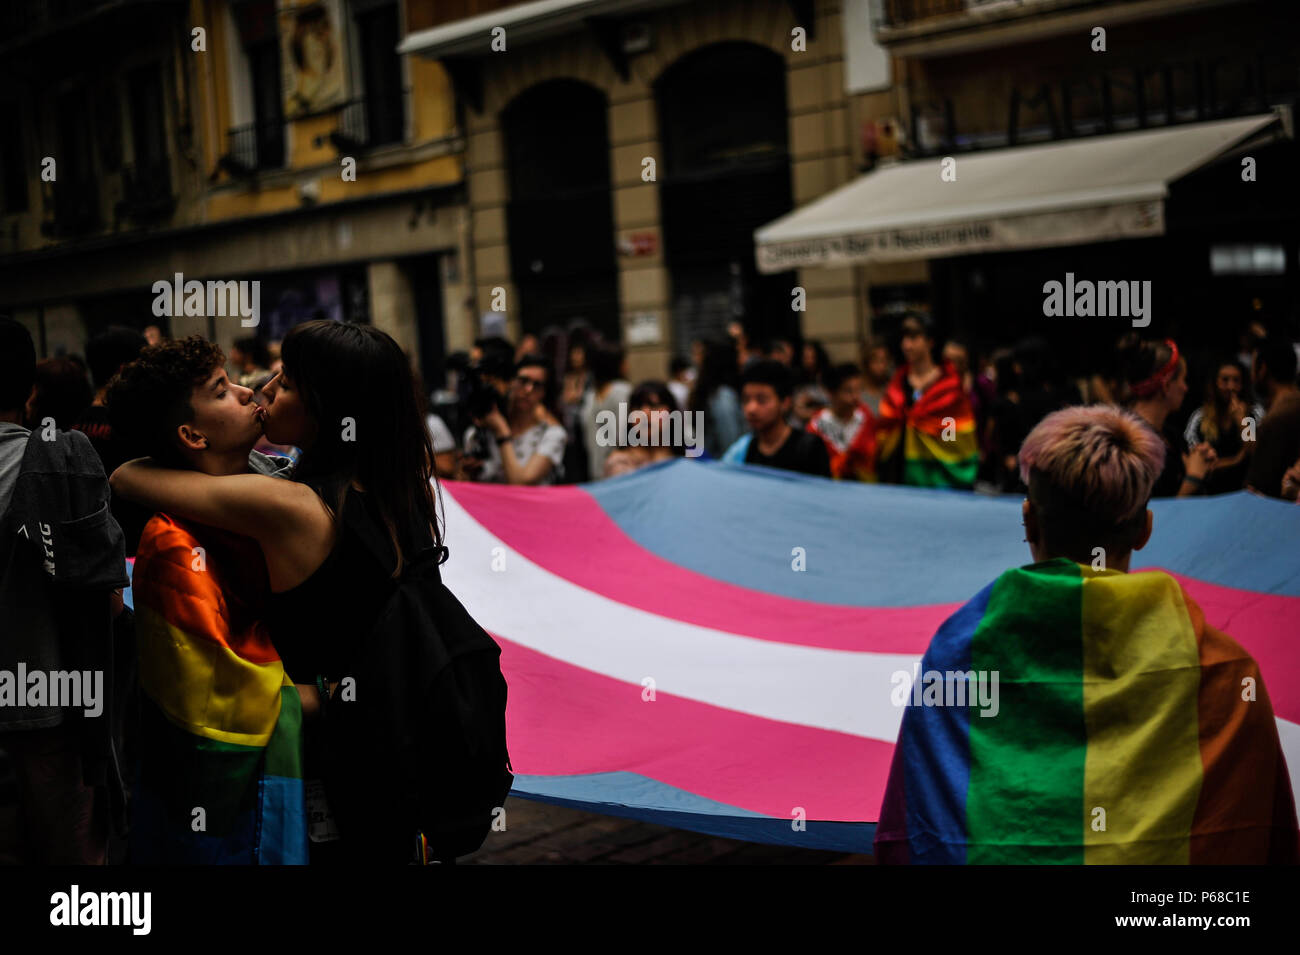 Pamplona, Spain. 28th June, 2018. Participants in the gay pride parade waves flags as thousands of people rally for LGBTQ+ rights in Pamplona, Spain on June 28, 2018 to mark the start of Pride weekend in the city. Credit: Mikel Cia Da Riva/Alamy Live News Stock Photo